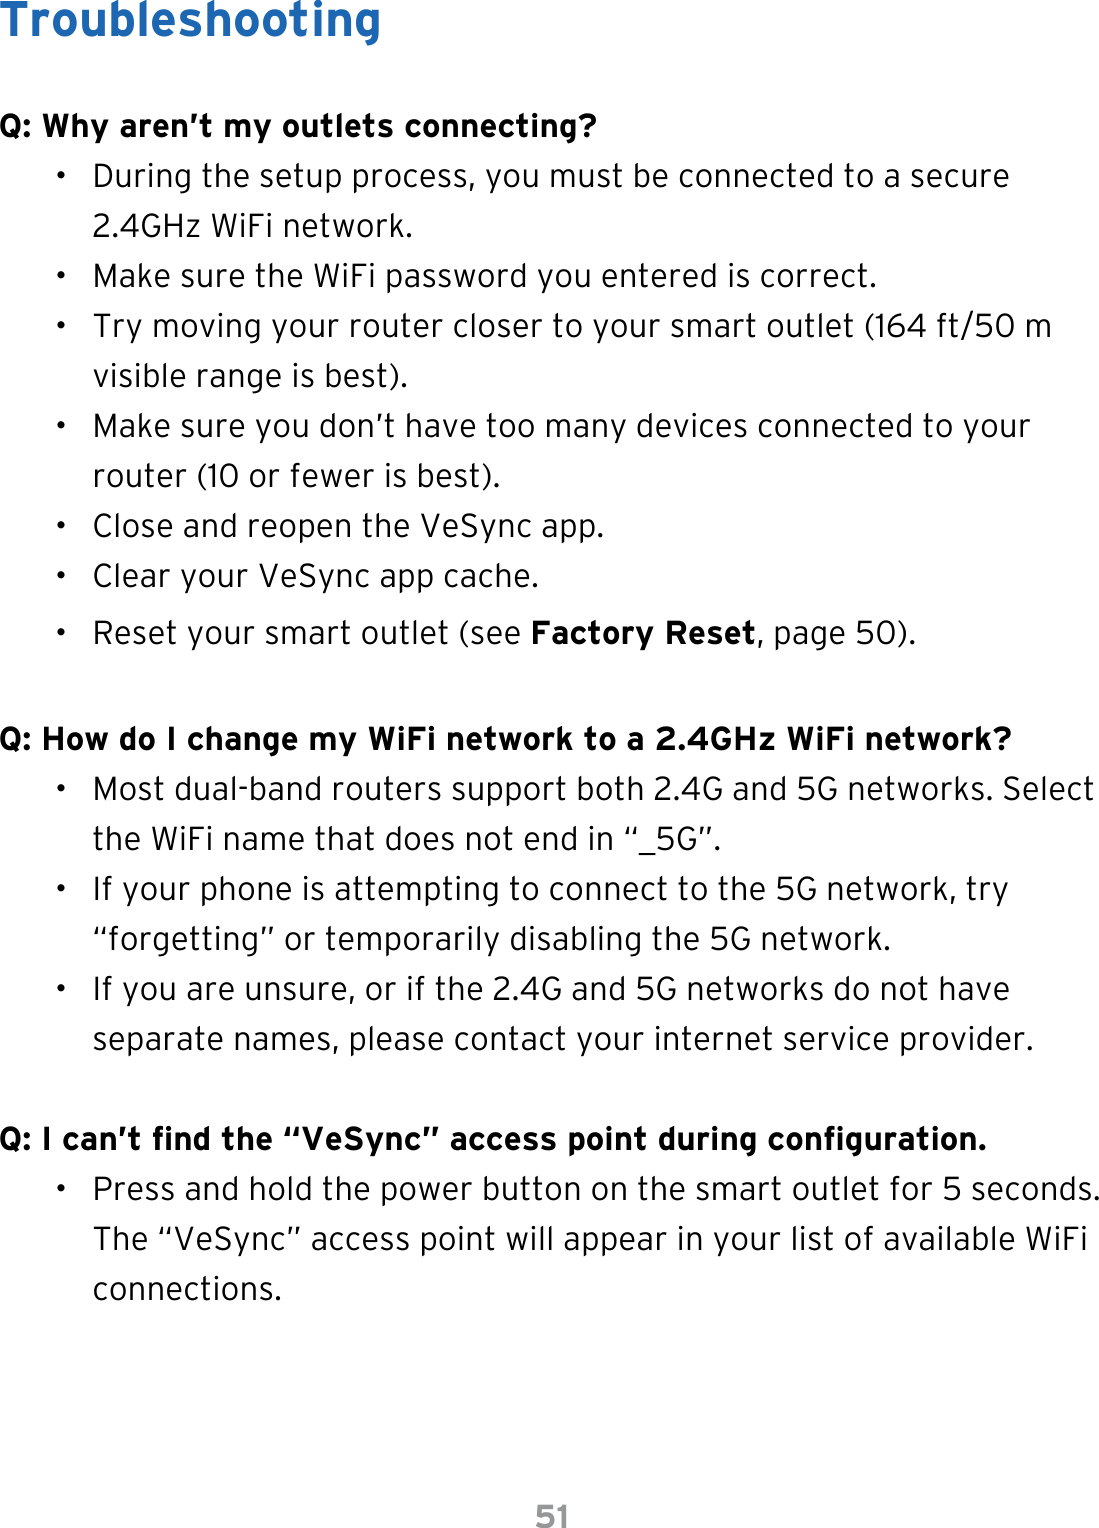 51TroubleshootingQ: Why aren’t my outlets connecting?•  During the setup process, you must be connected to a secure 2.4GHz WiFi network.•  Make sure the WiFi password you entered is correct.•  Try moving your router closer to your smart outlet (164 ft/50 m visible range is best).•  Make sure you don’t have too many devices connected to your router (10 or fewer is best).•  Close and reopen the VeSync app.•  Clear your VeSync app cache. •  Reset your smart outlet (see Factory Reset, page 50).Q: How do I change my WiFi network to a 2.4GHz WiFi network?•  Most dual-band routers support both 2.4G and 5G networks. Select the WiFi name that does not end in “_5G”.•  If your phone is attempting to connect to the 5G network, try “forgetting” or temporarily disabling the 5G network.•  If you are unsure, or if the 2.4G and 5G networks do not have separate names, please contact your internet service provider.Q: I can’t nd the “VeSync” access point during conguration.•  Press and hold the power button on the smart outlet for 5 seconds. The “VeSync” access point will appear in your list of available WiFi connections.